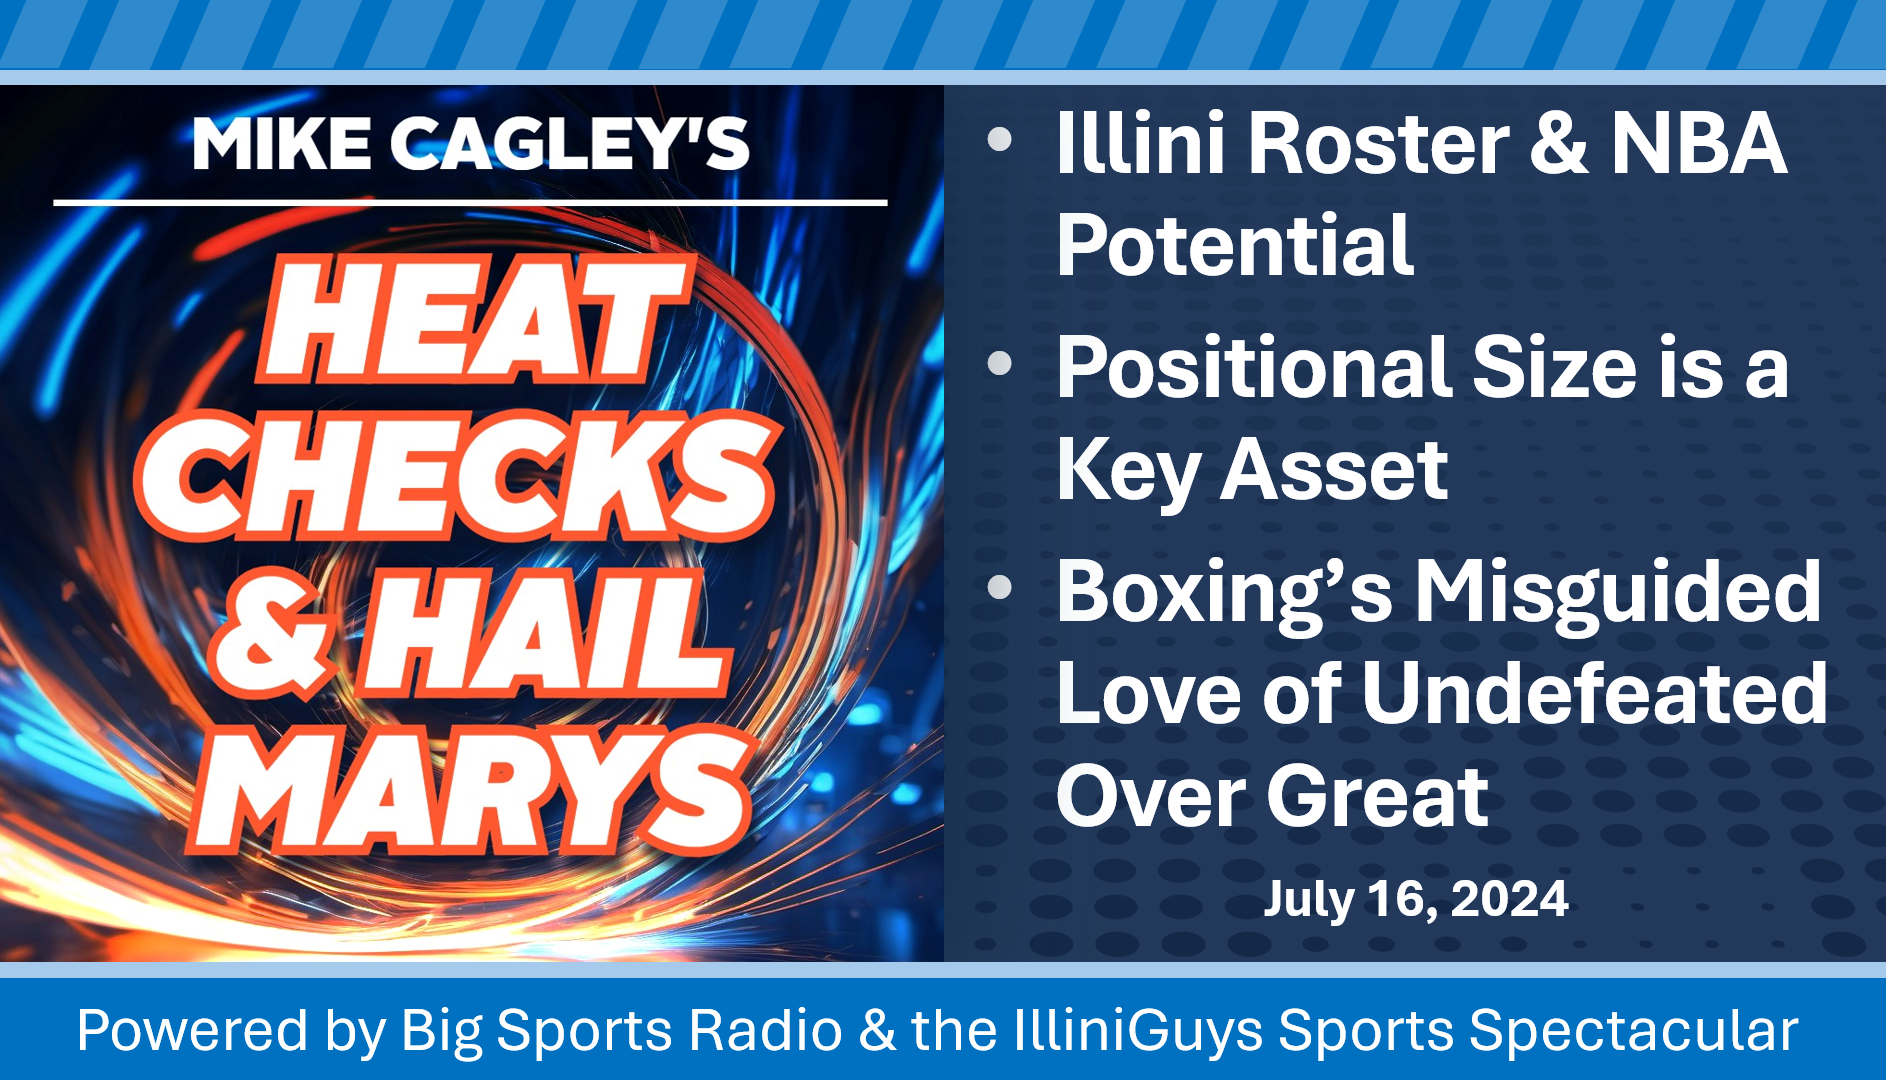 Illini Roster NBA Potential, Positional Size & Boxing's Love of Undefeated - YouTube Edition